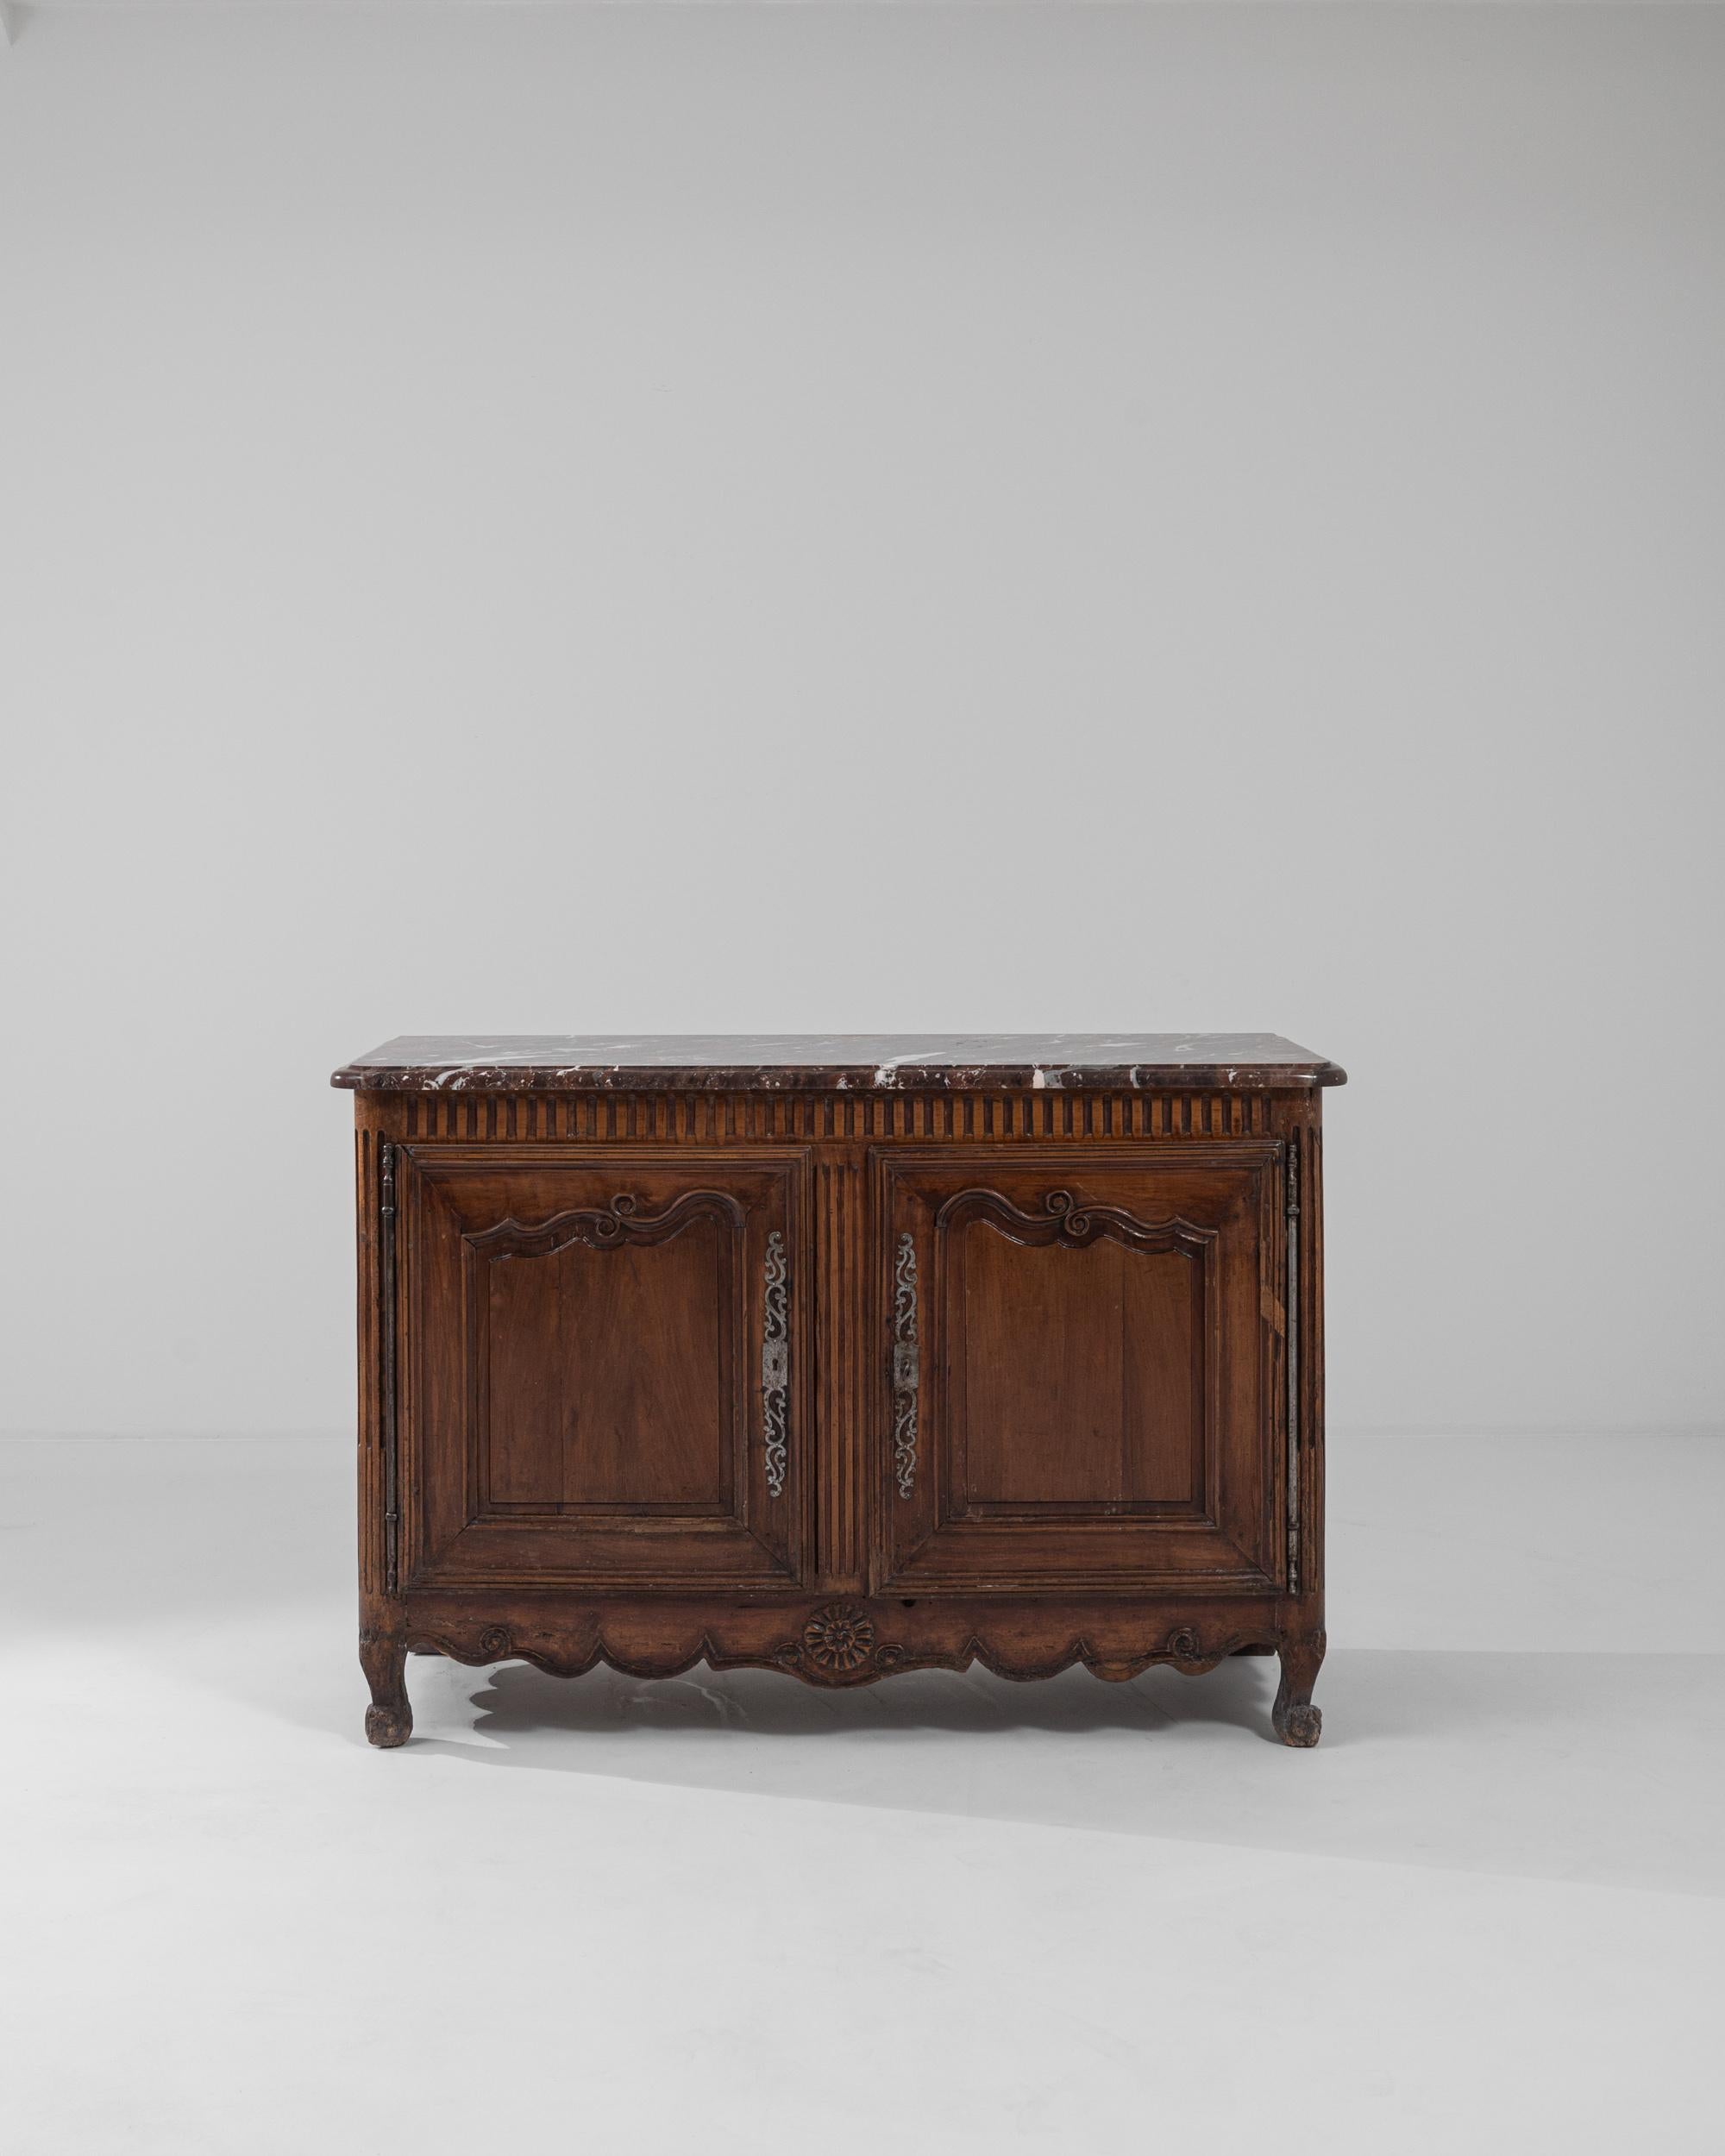 A marble tabletop gives this antique wooden buffet an opulent crowning touch. Made in France in the 1800s, the design combines a variety of stylistic motifs into a graceful, harmonious whole. Fluted accents and carved rosettes add a Neoclassical